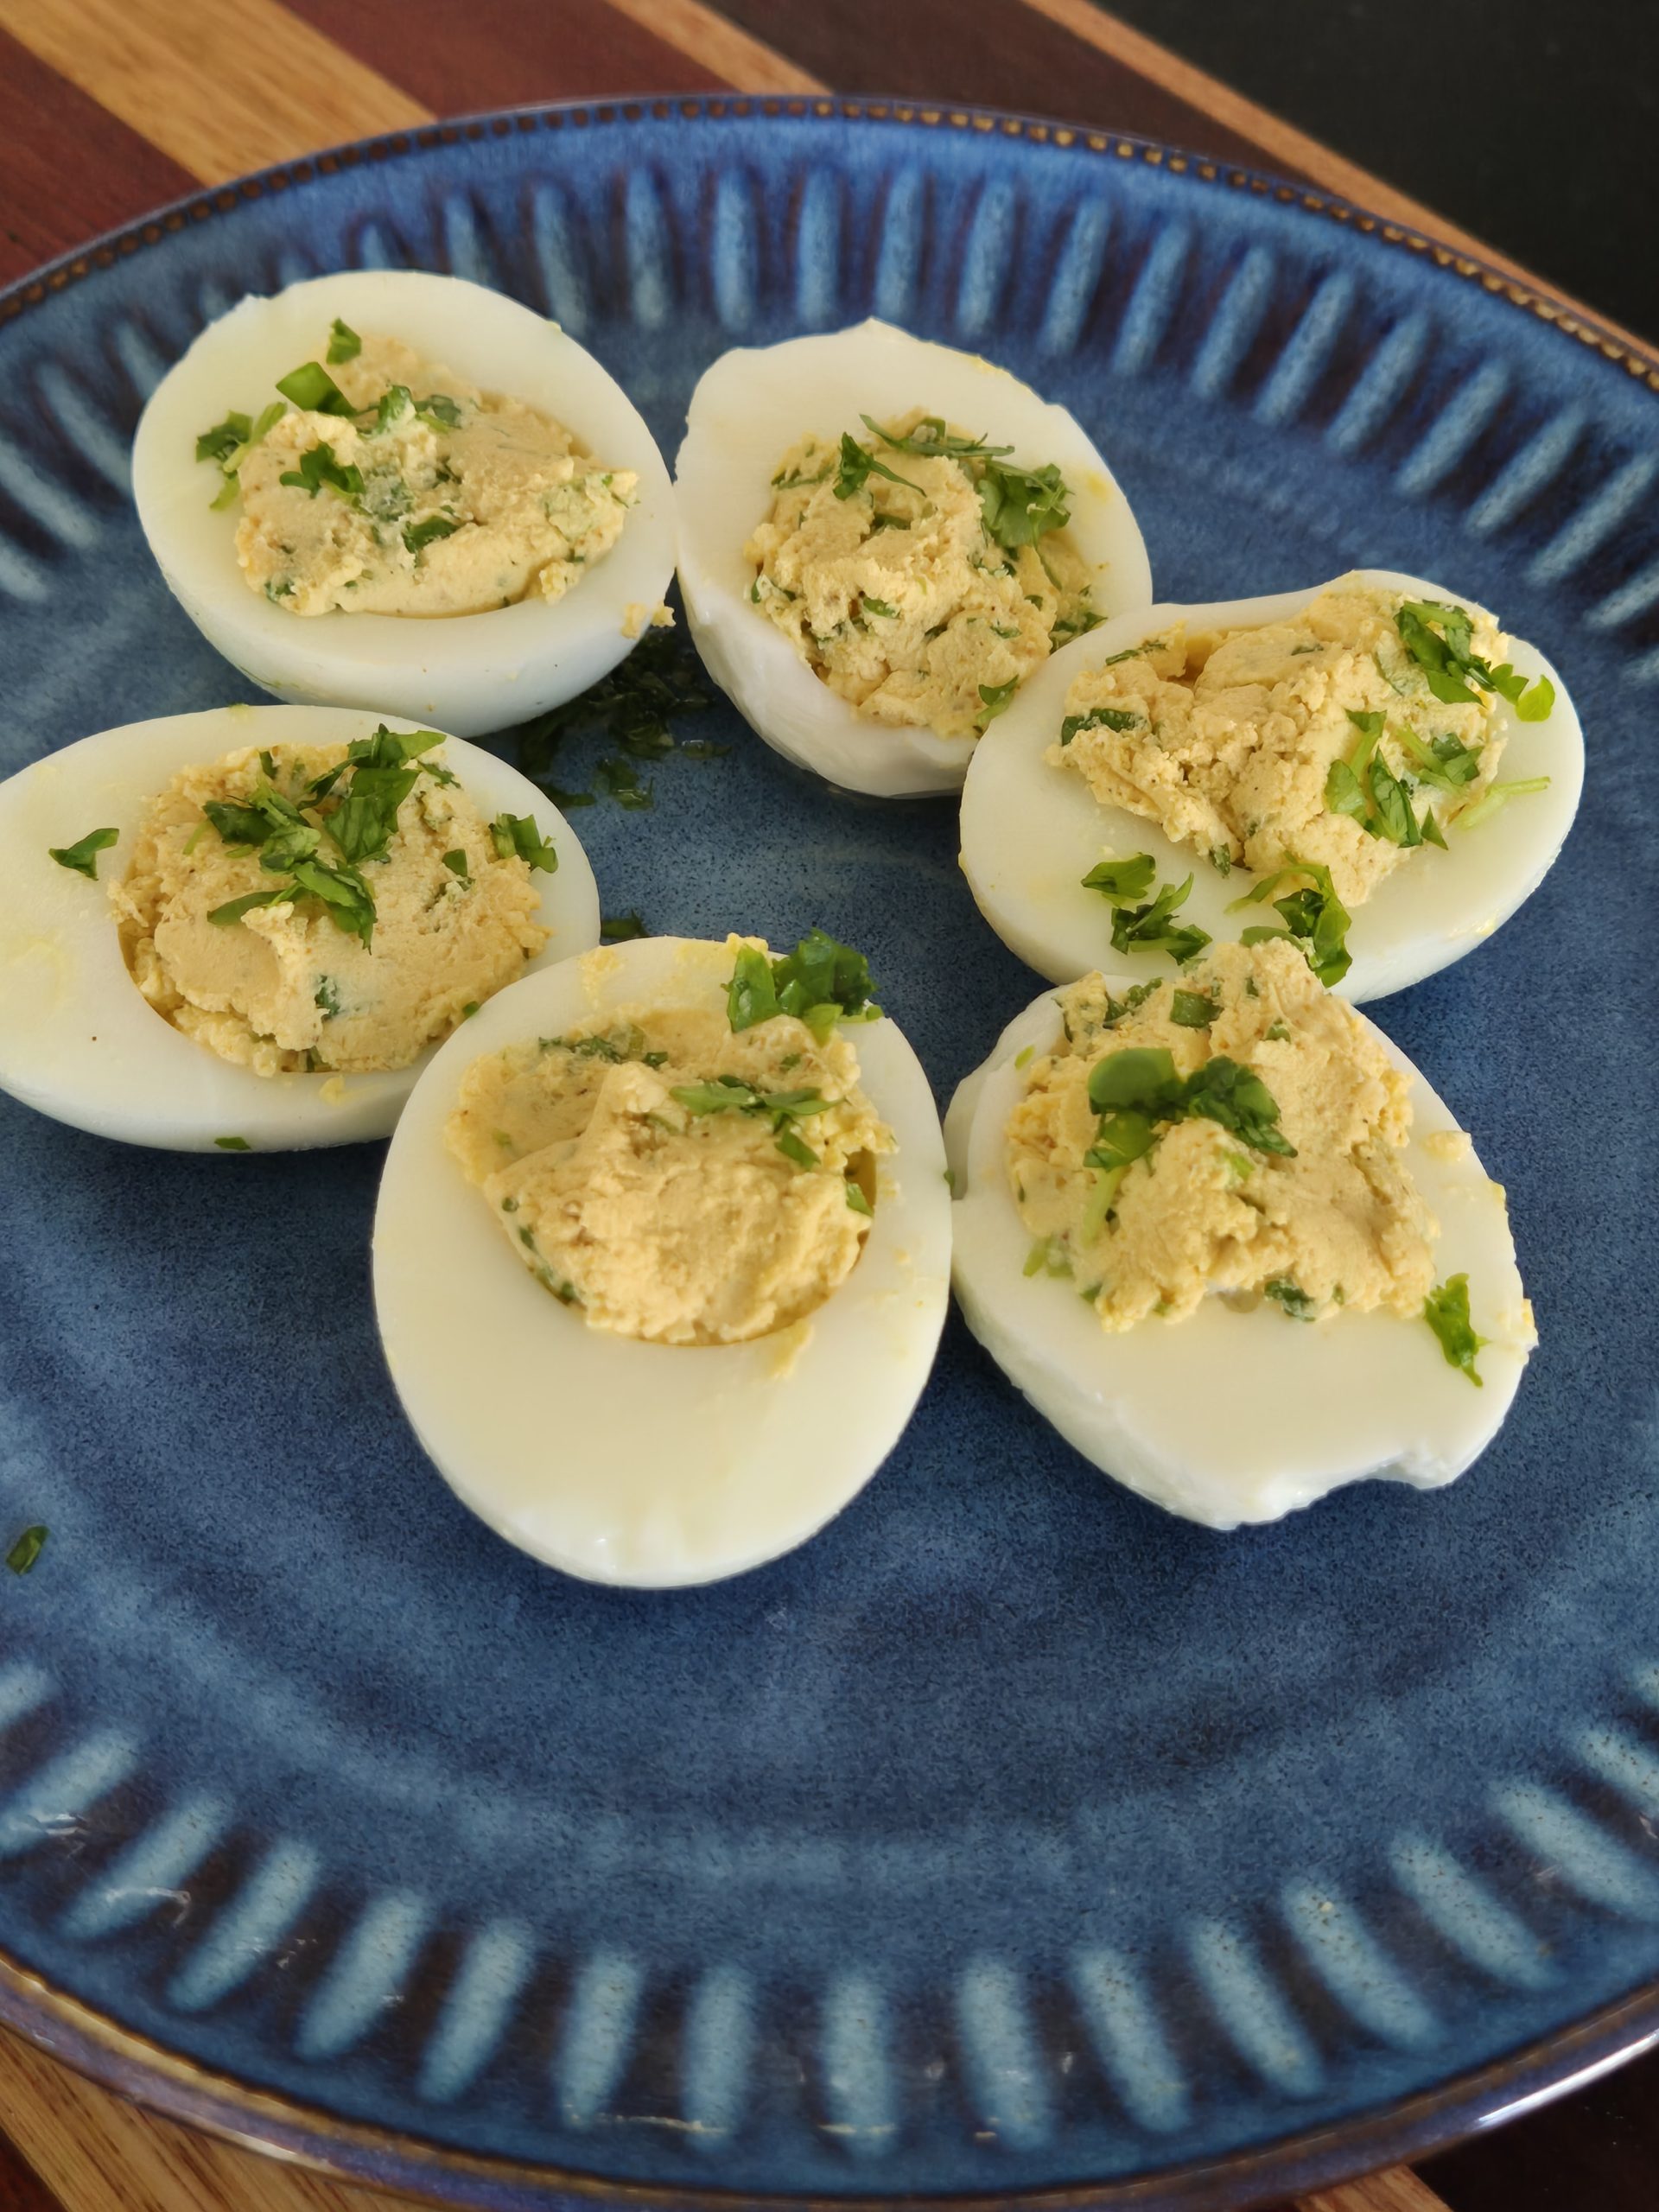 A plate of devilled eggs - boiled eggs halved and thier yolks are mixed with ingredients and spooned back in